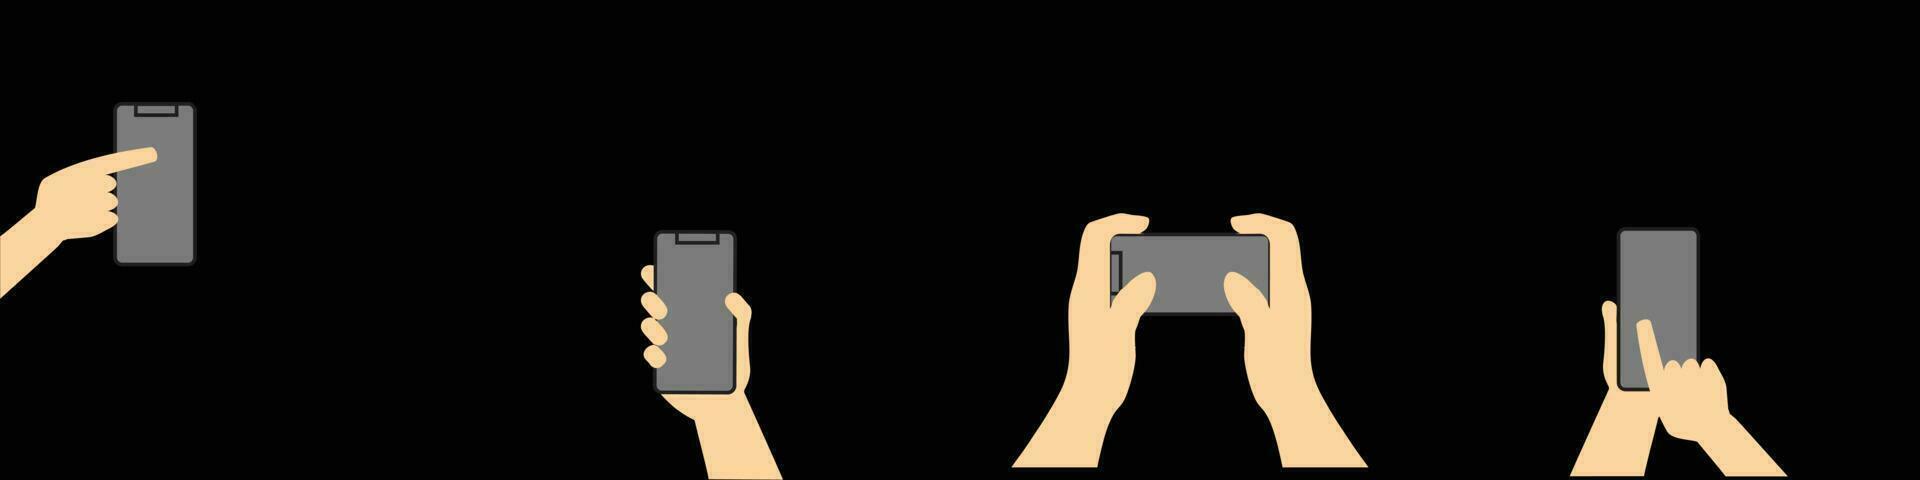 ILLUSTRATION OF HOLDING A GADGET WITH BOTH HANDS vector